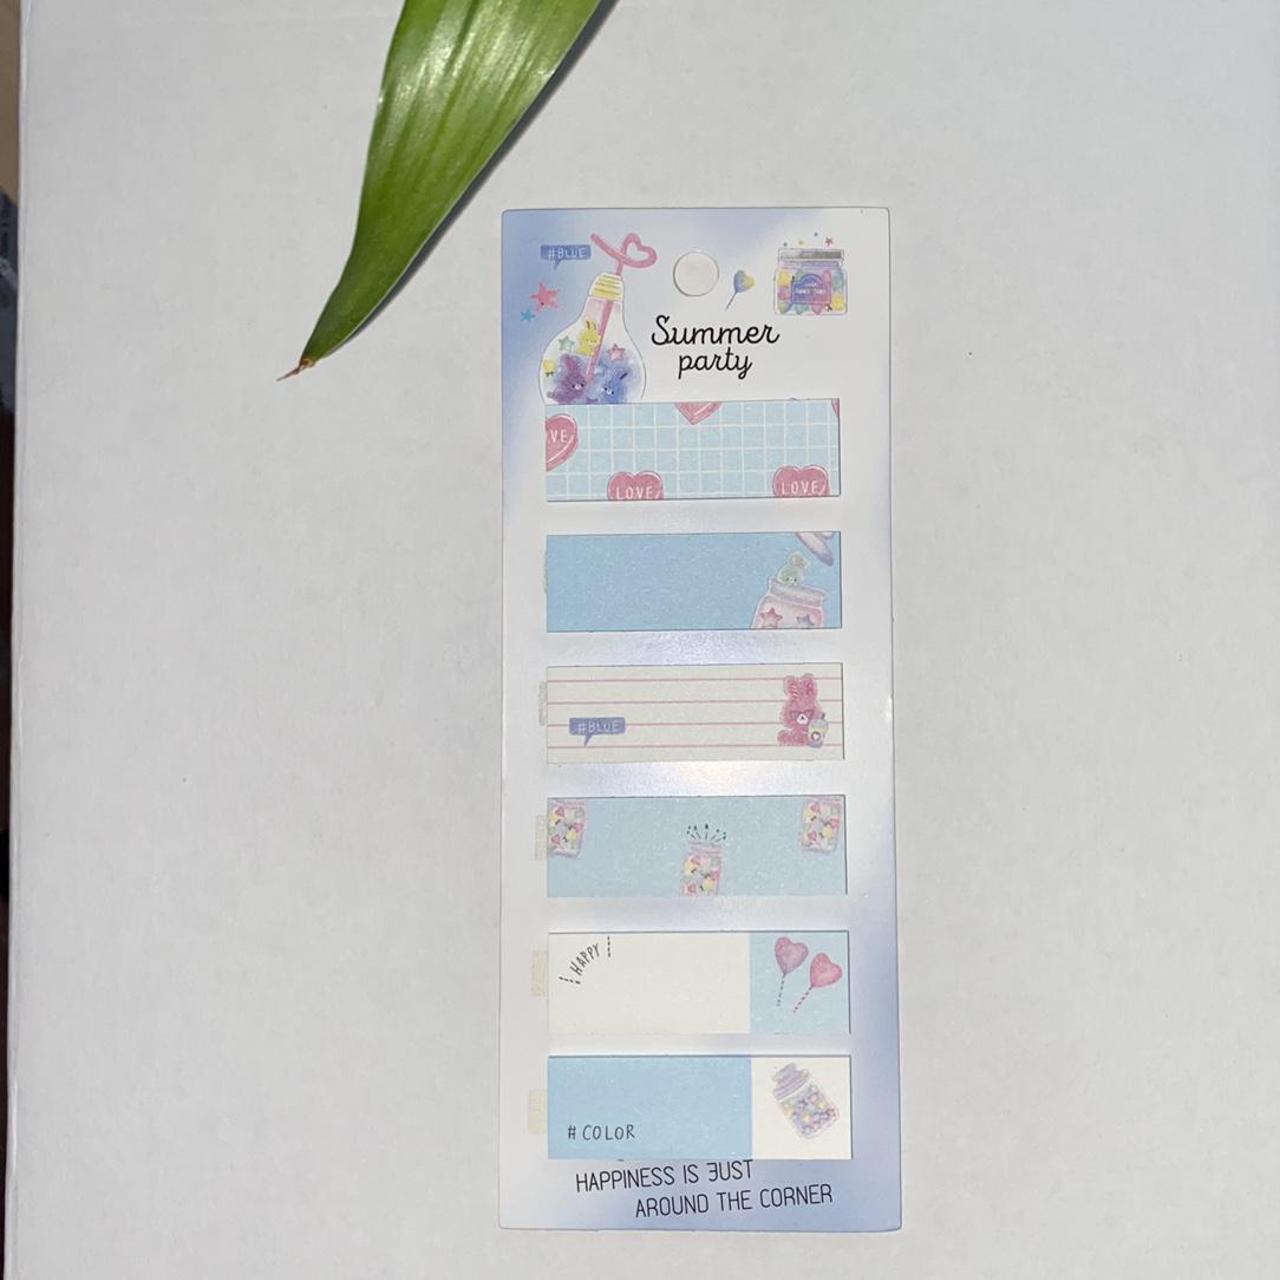 Product Image 1 - Note flags, sticky post-it flags

Can